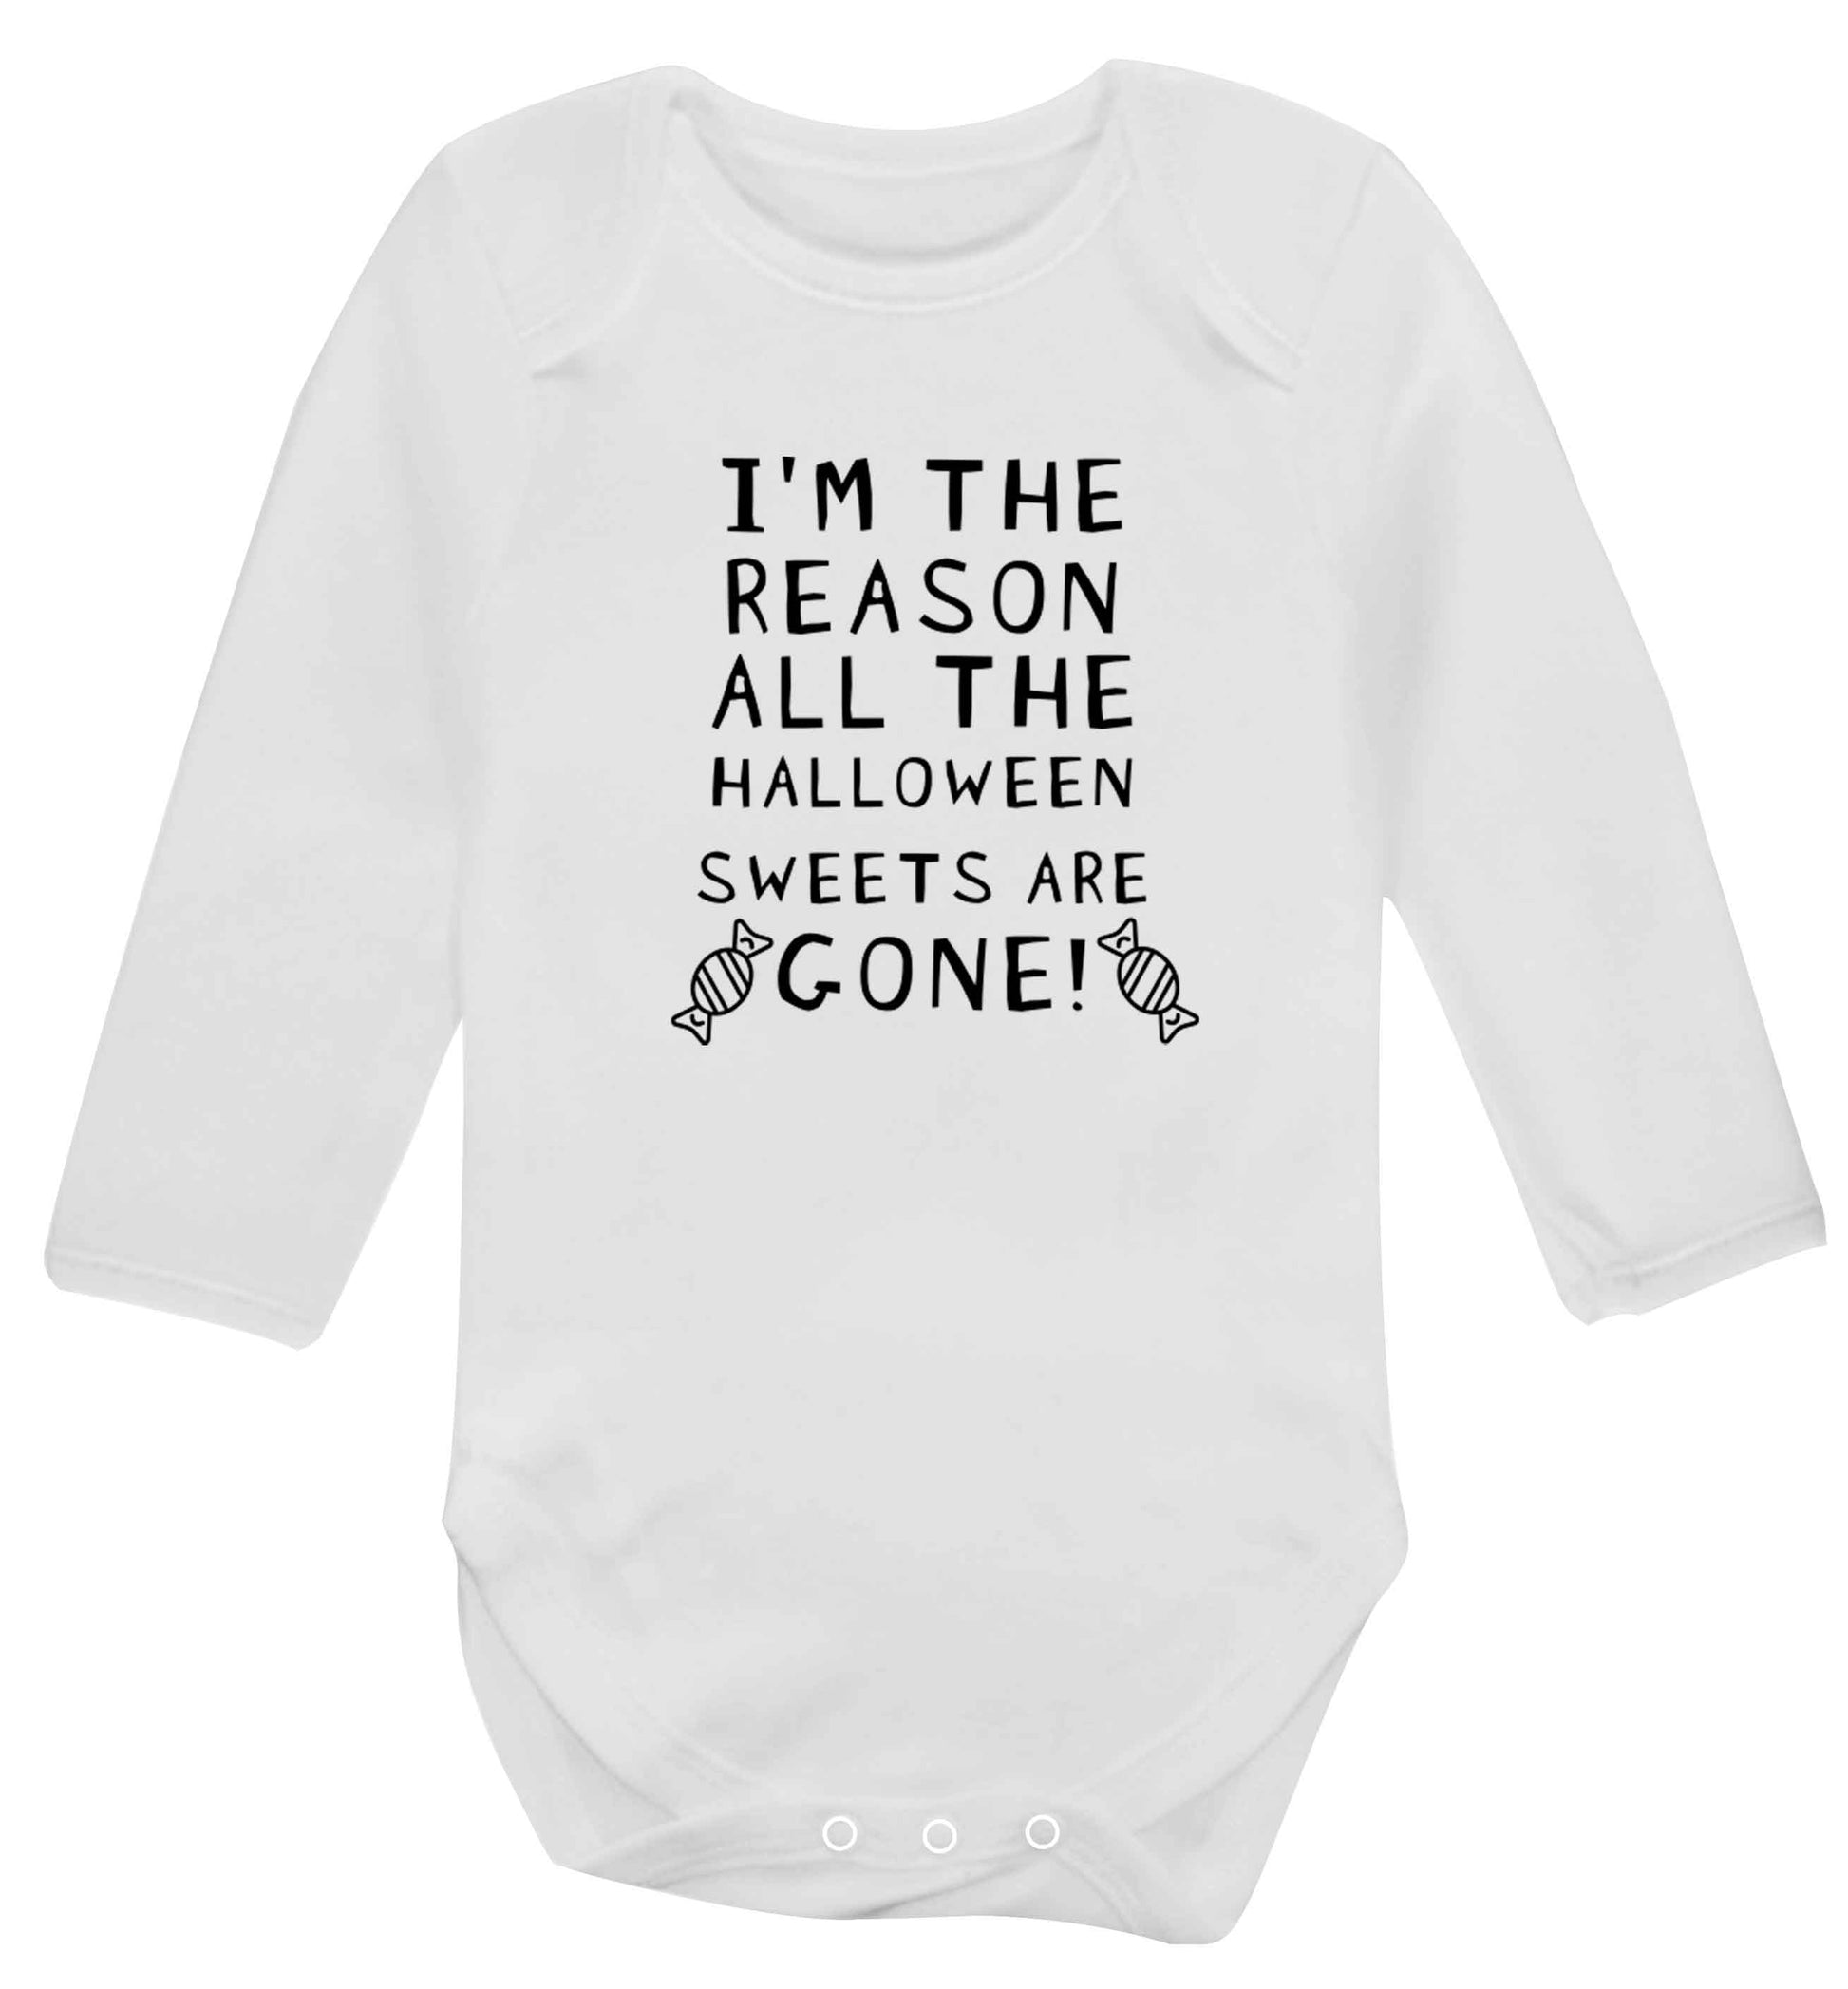 I'm the reason all of the halloween sweets are gone baby vest long sleeved white 6-12 months